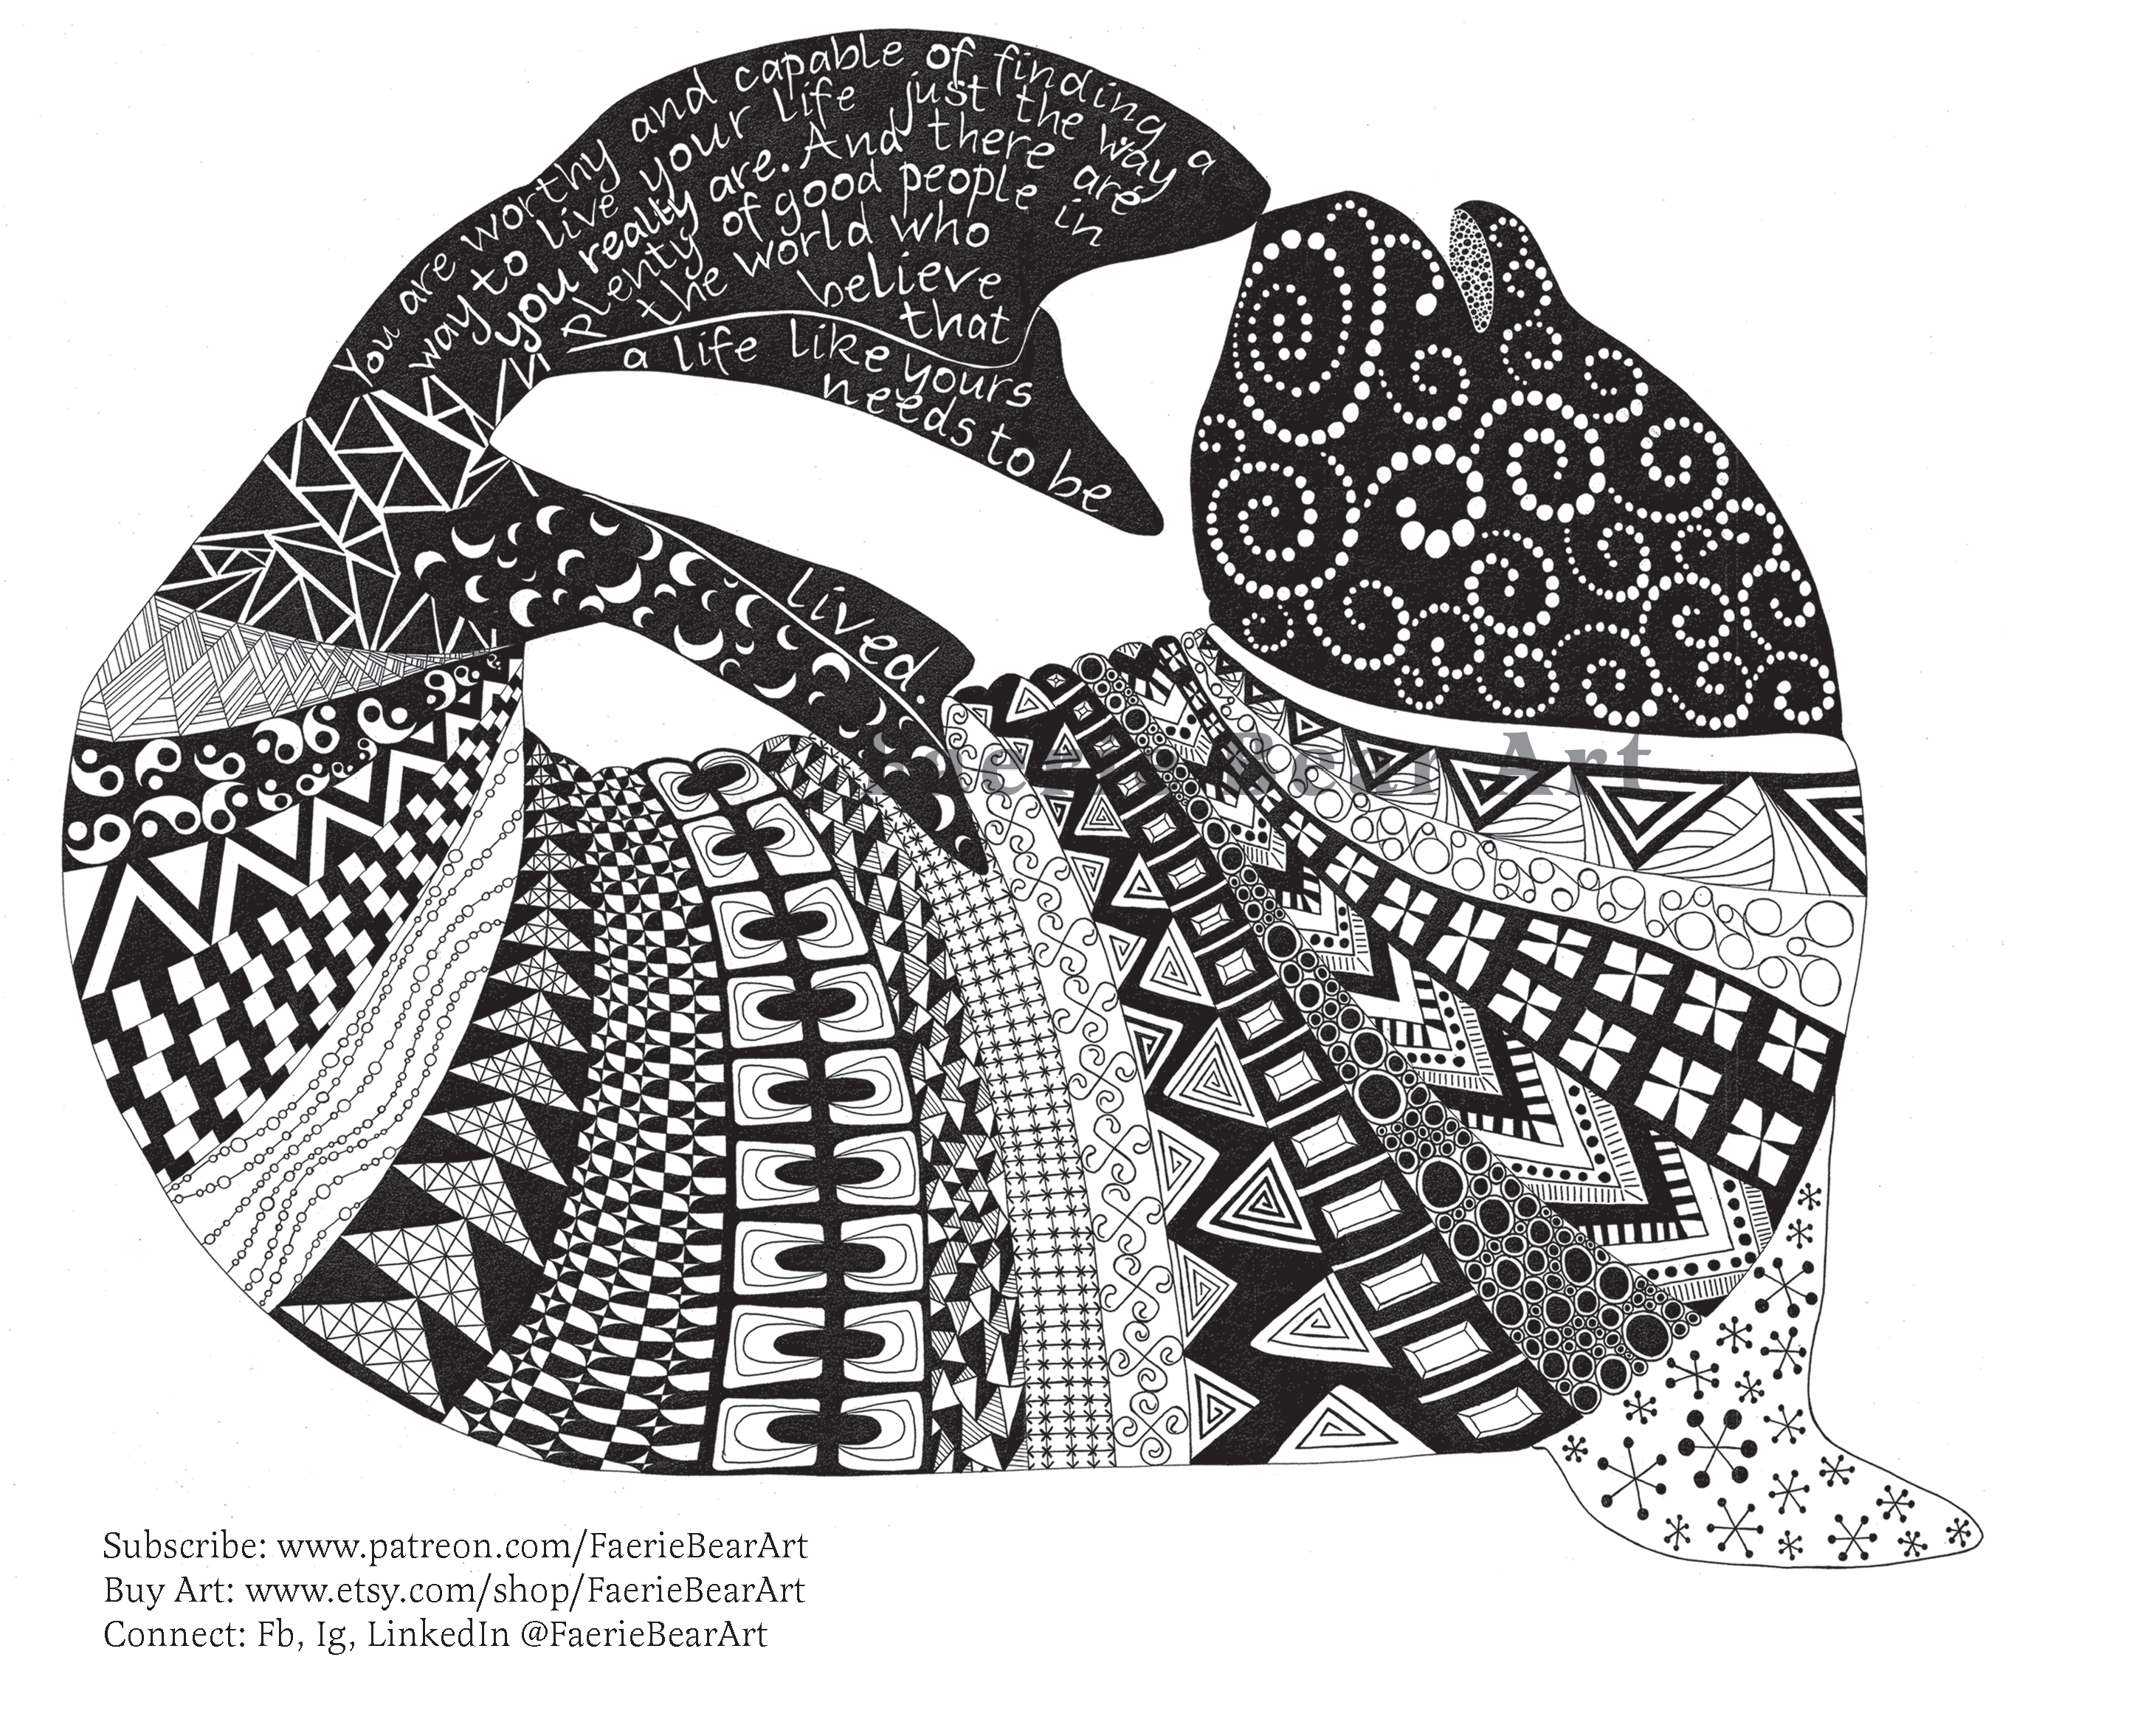 "An illustration of a female elephant seal designed in ink and made of elaborate designs, usually called zentangles.  The seal is standing up and booping their own nose with their tail playfully. On the tail of the sloth is text which reads, "You are worthy and capable of finding a way to live your life just the way you really are.  And there are plenty of good people in the world who believe that a life like yours needs to be lived." This text is a quote from a suicide prevention book called "Hello Cruel World" by Kate Bornstein, a mentally ill trans femme person. This artwork was created by Skye Ashton Kantola of Faerie Bear Art."